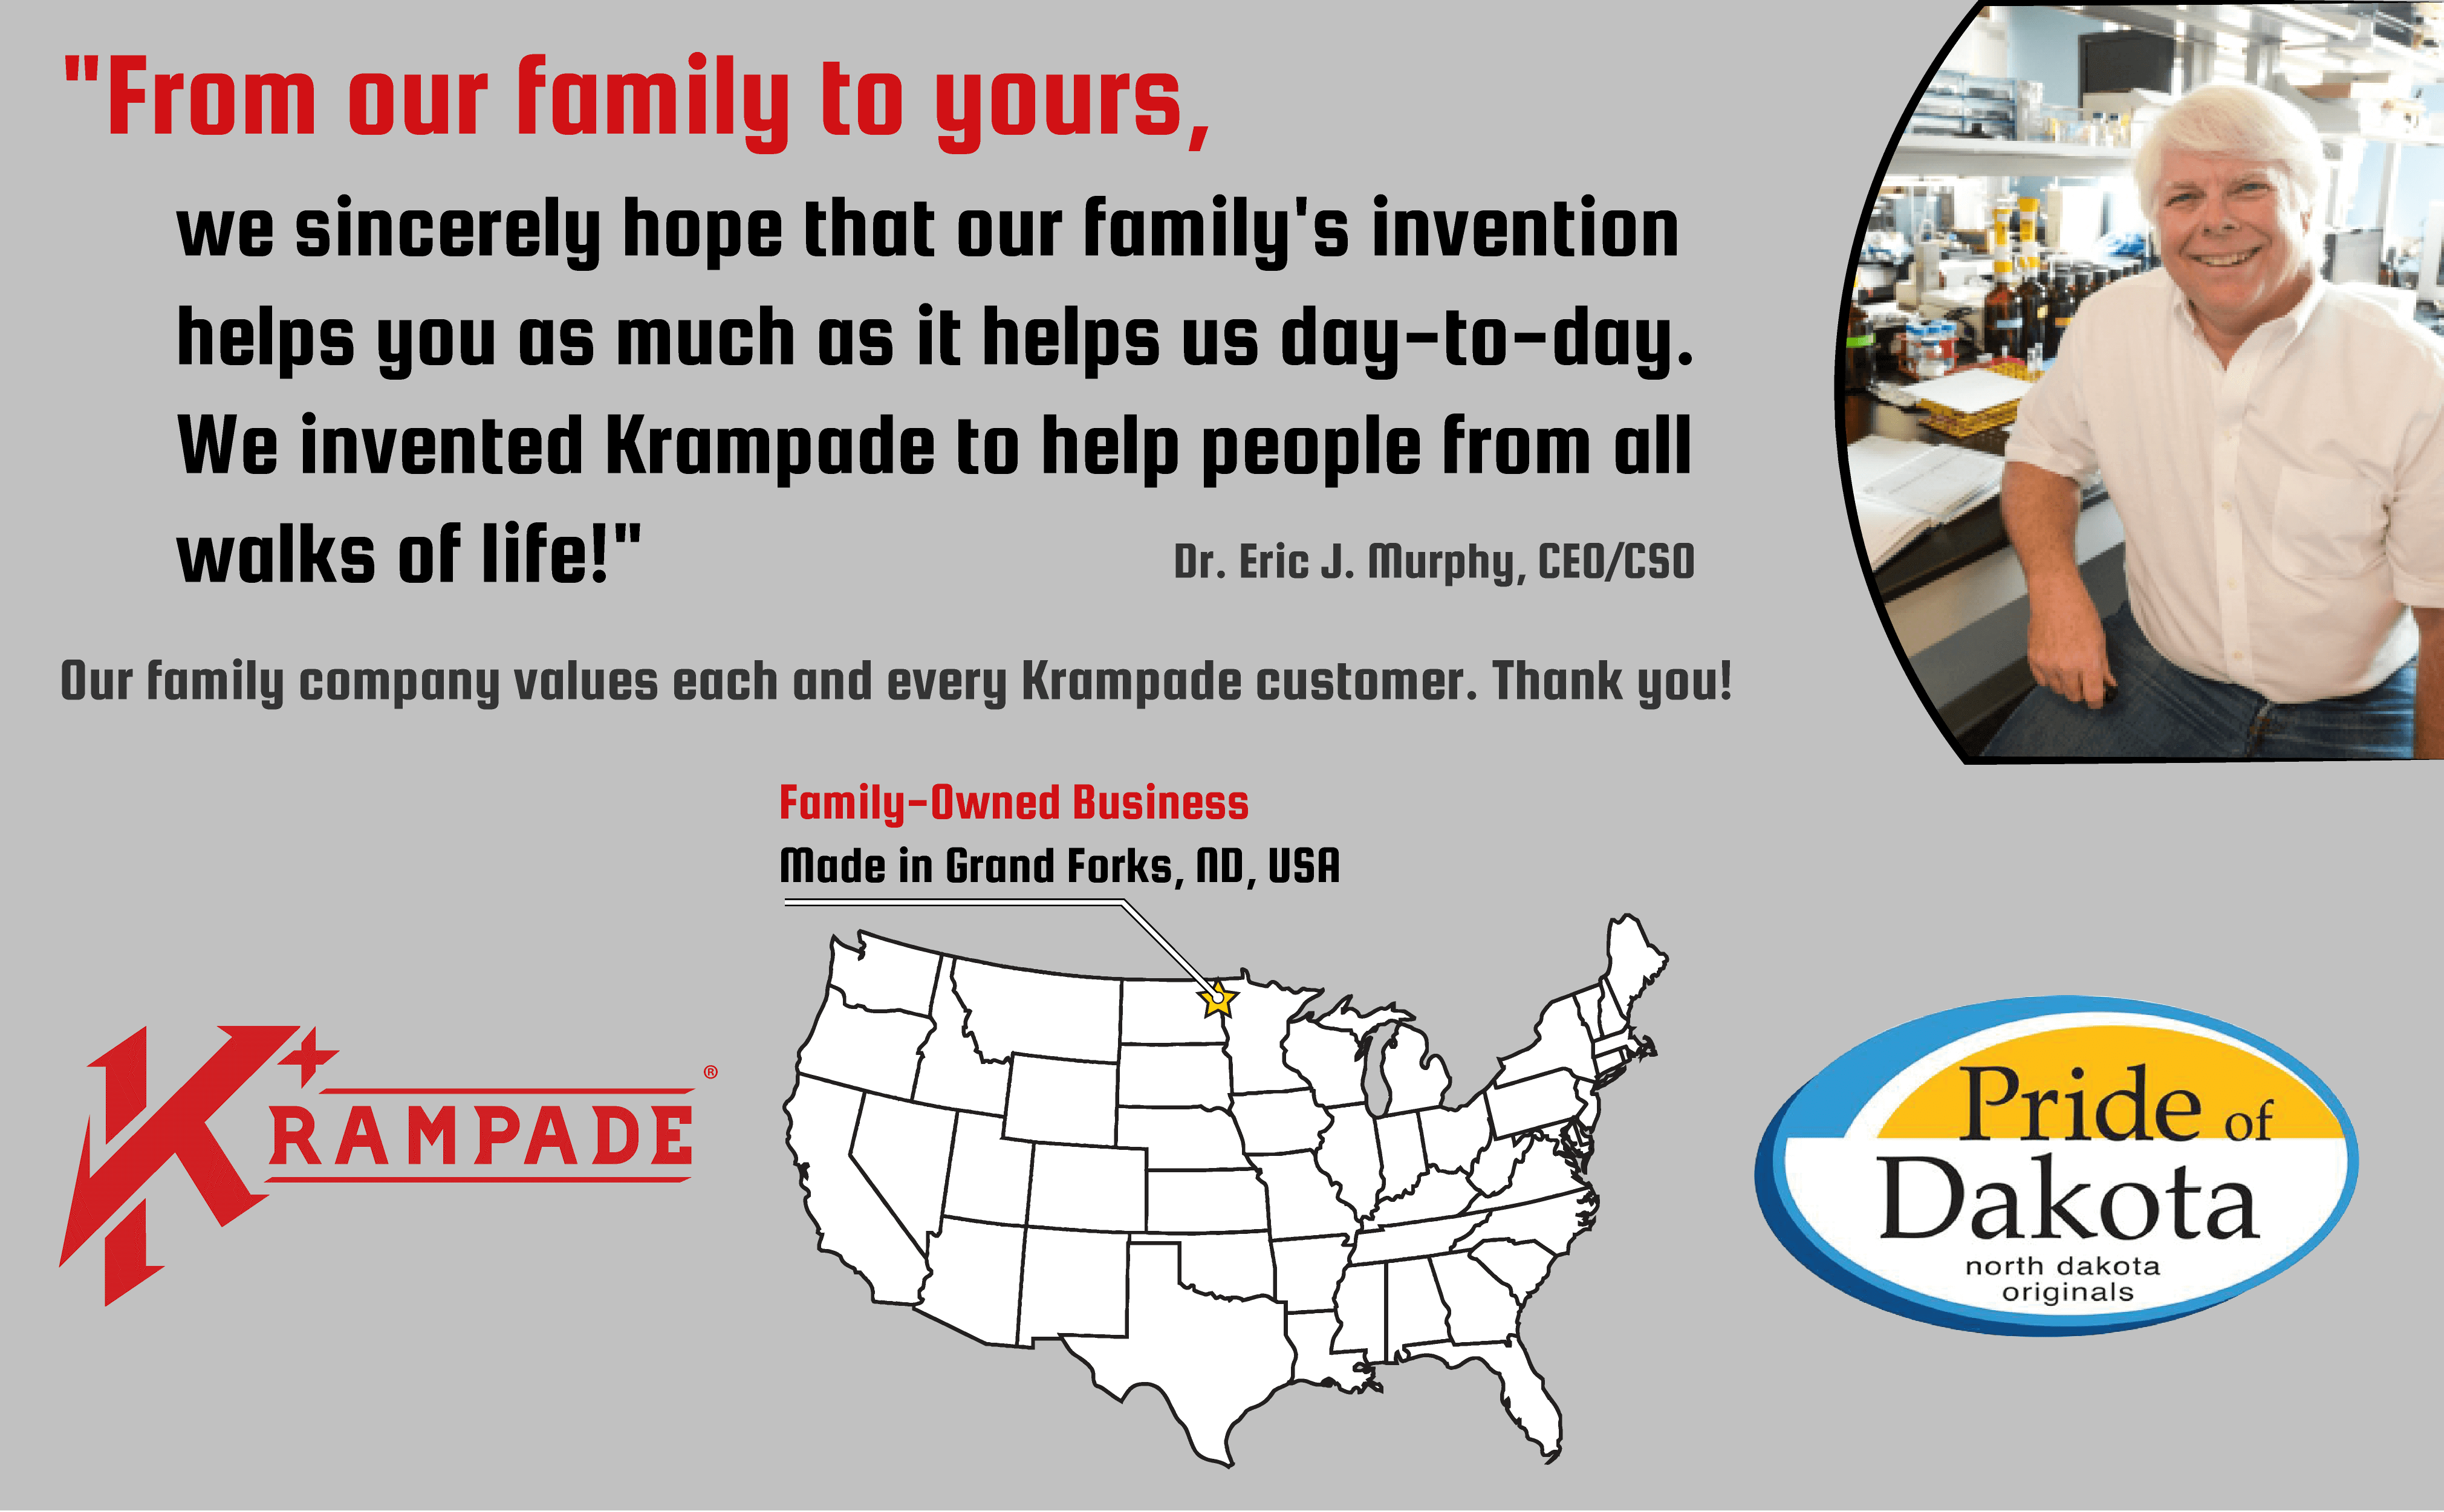 From our family to yours, we want to help you live better everyday with our family invention, Krampade.